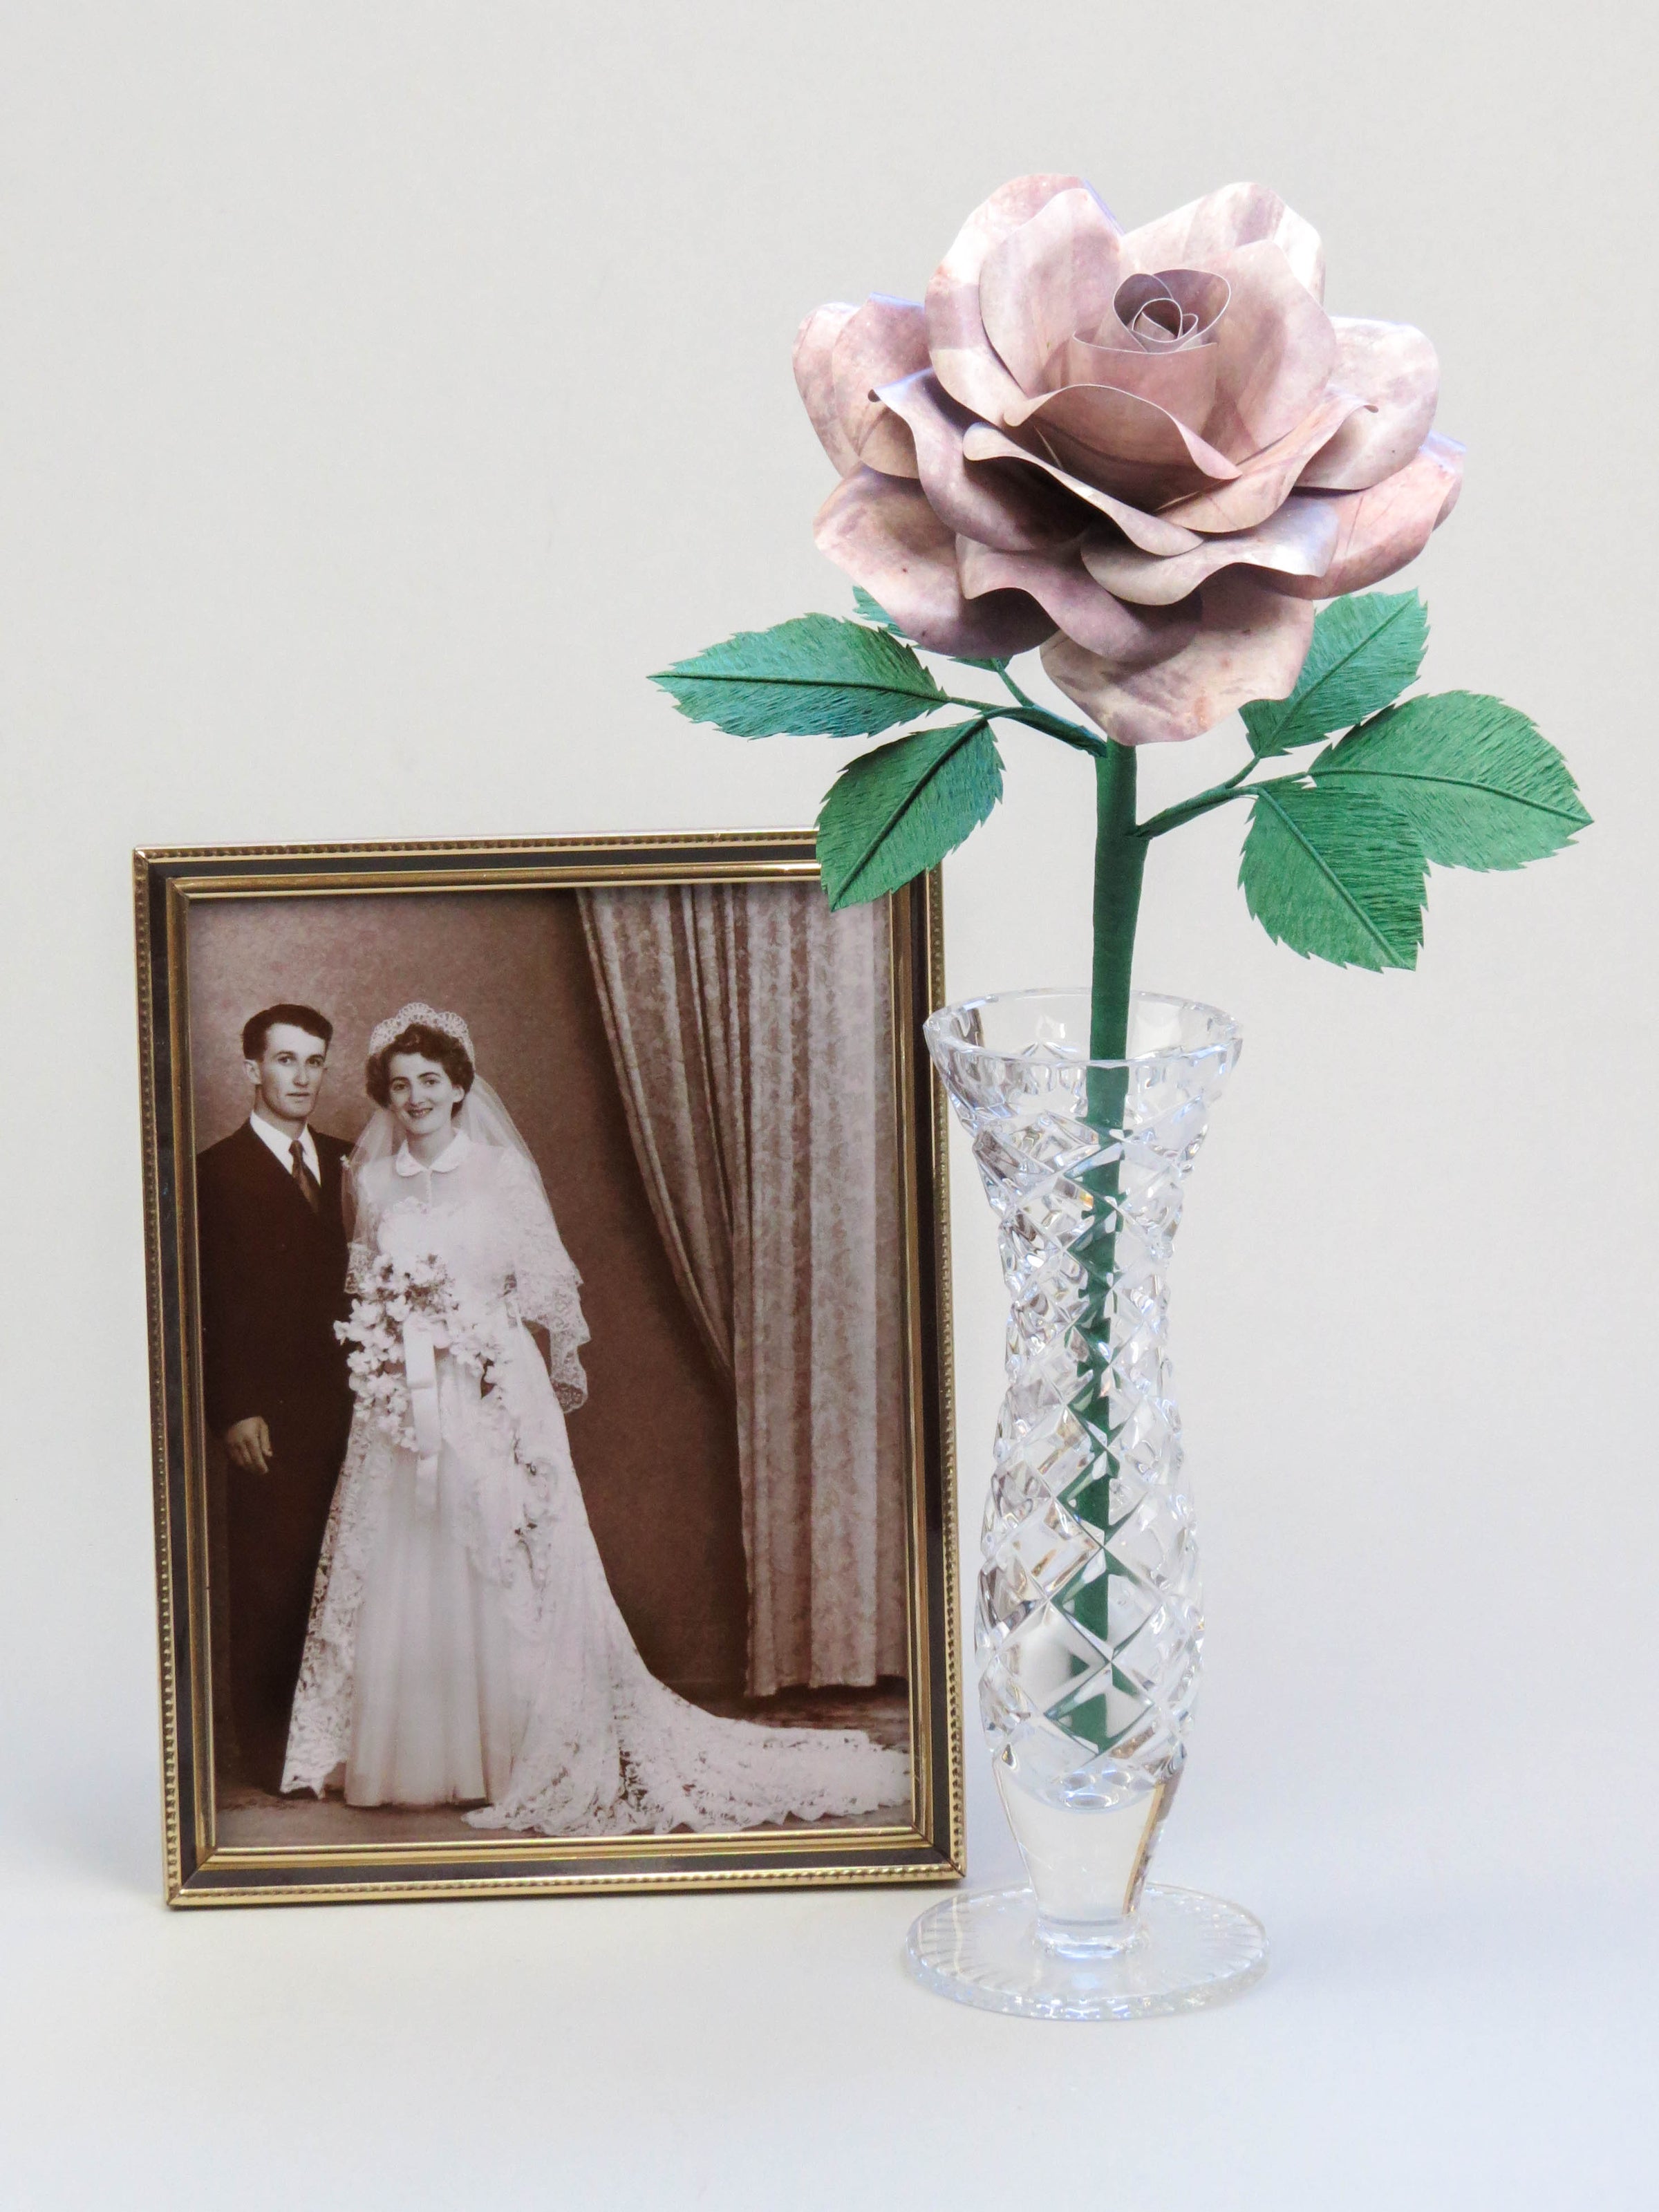 Grey tin paper rose with six forest green leaves standing in a slender glass vase with a thin gold framed sepia wedding photo of a happy vintage bride and groom standing beside it